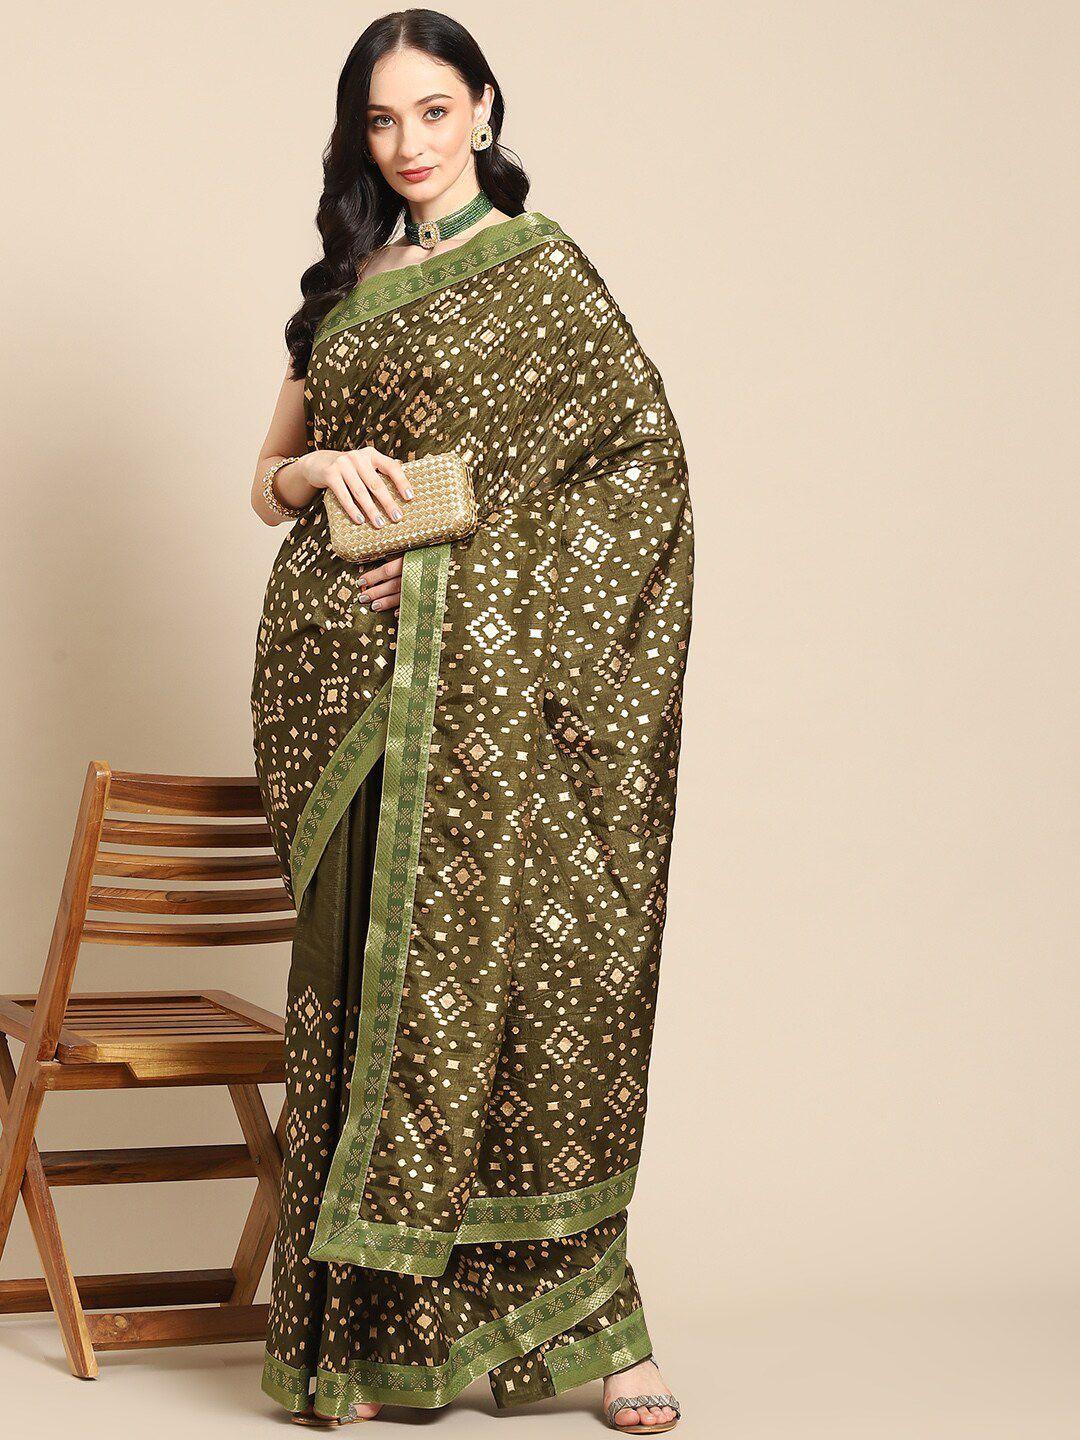 all about you olive green & gold geometric print zari saree with blouse piece